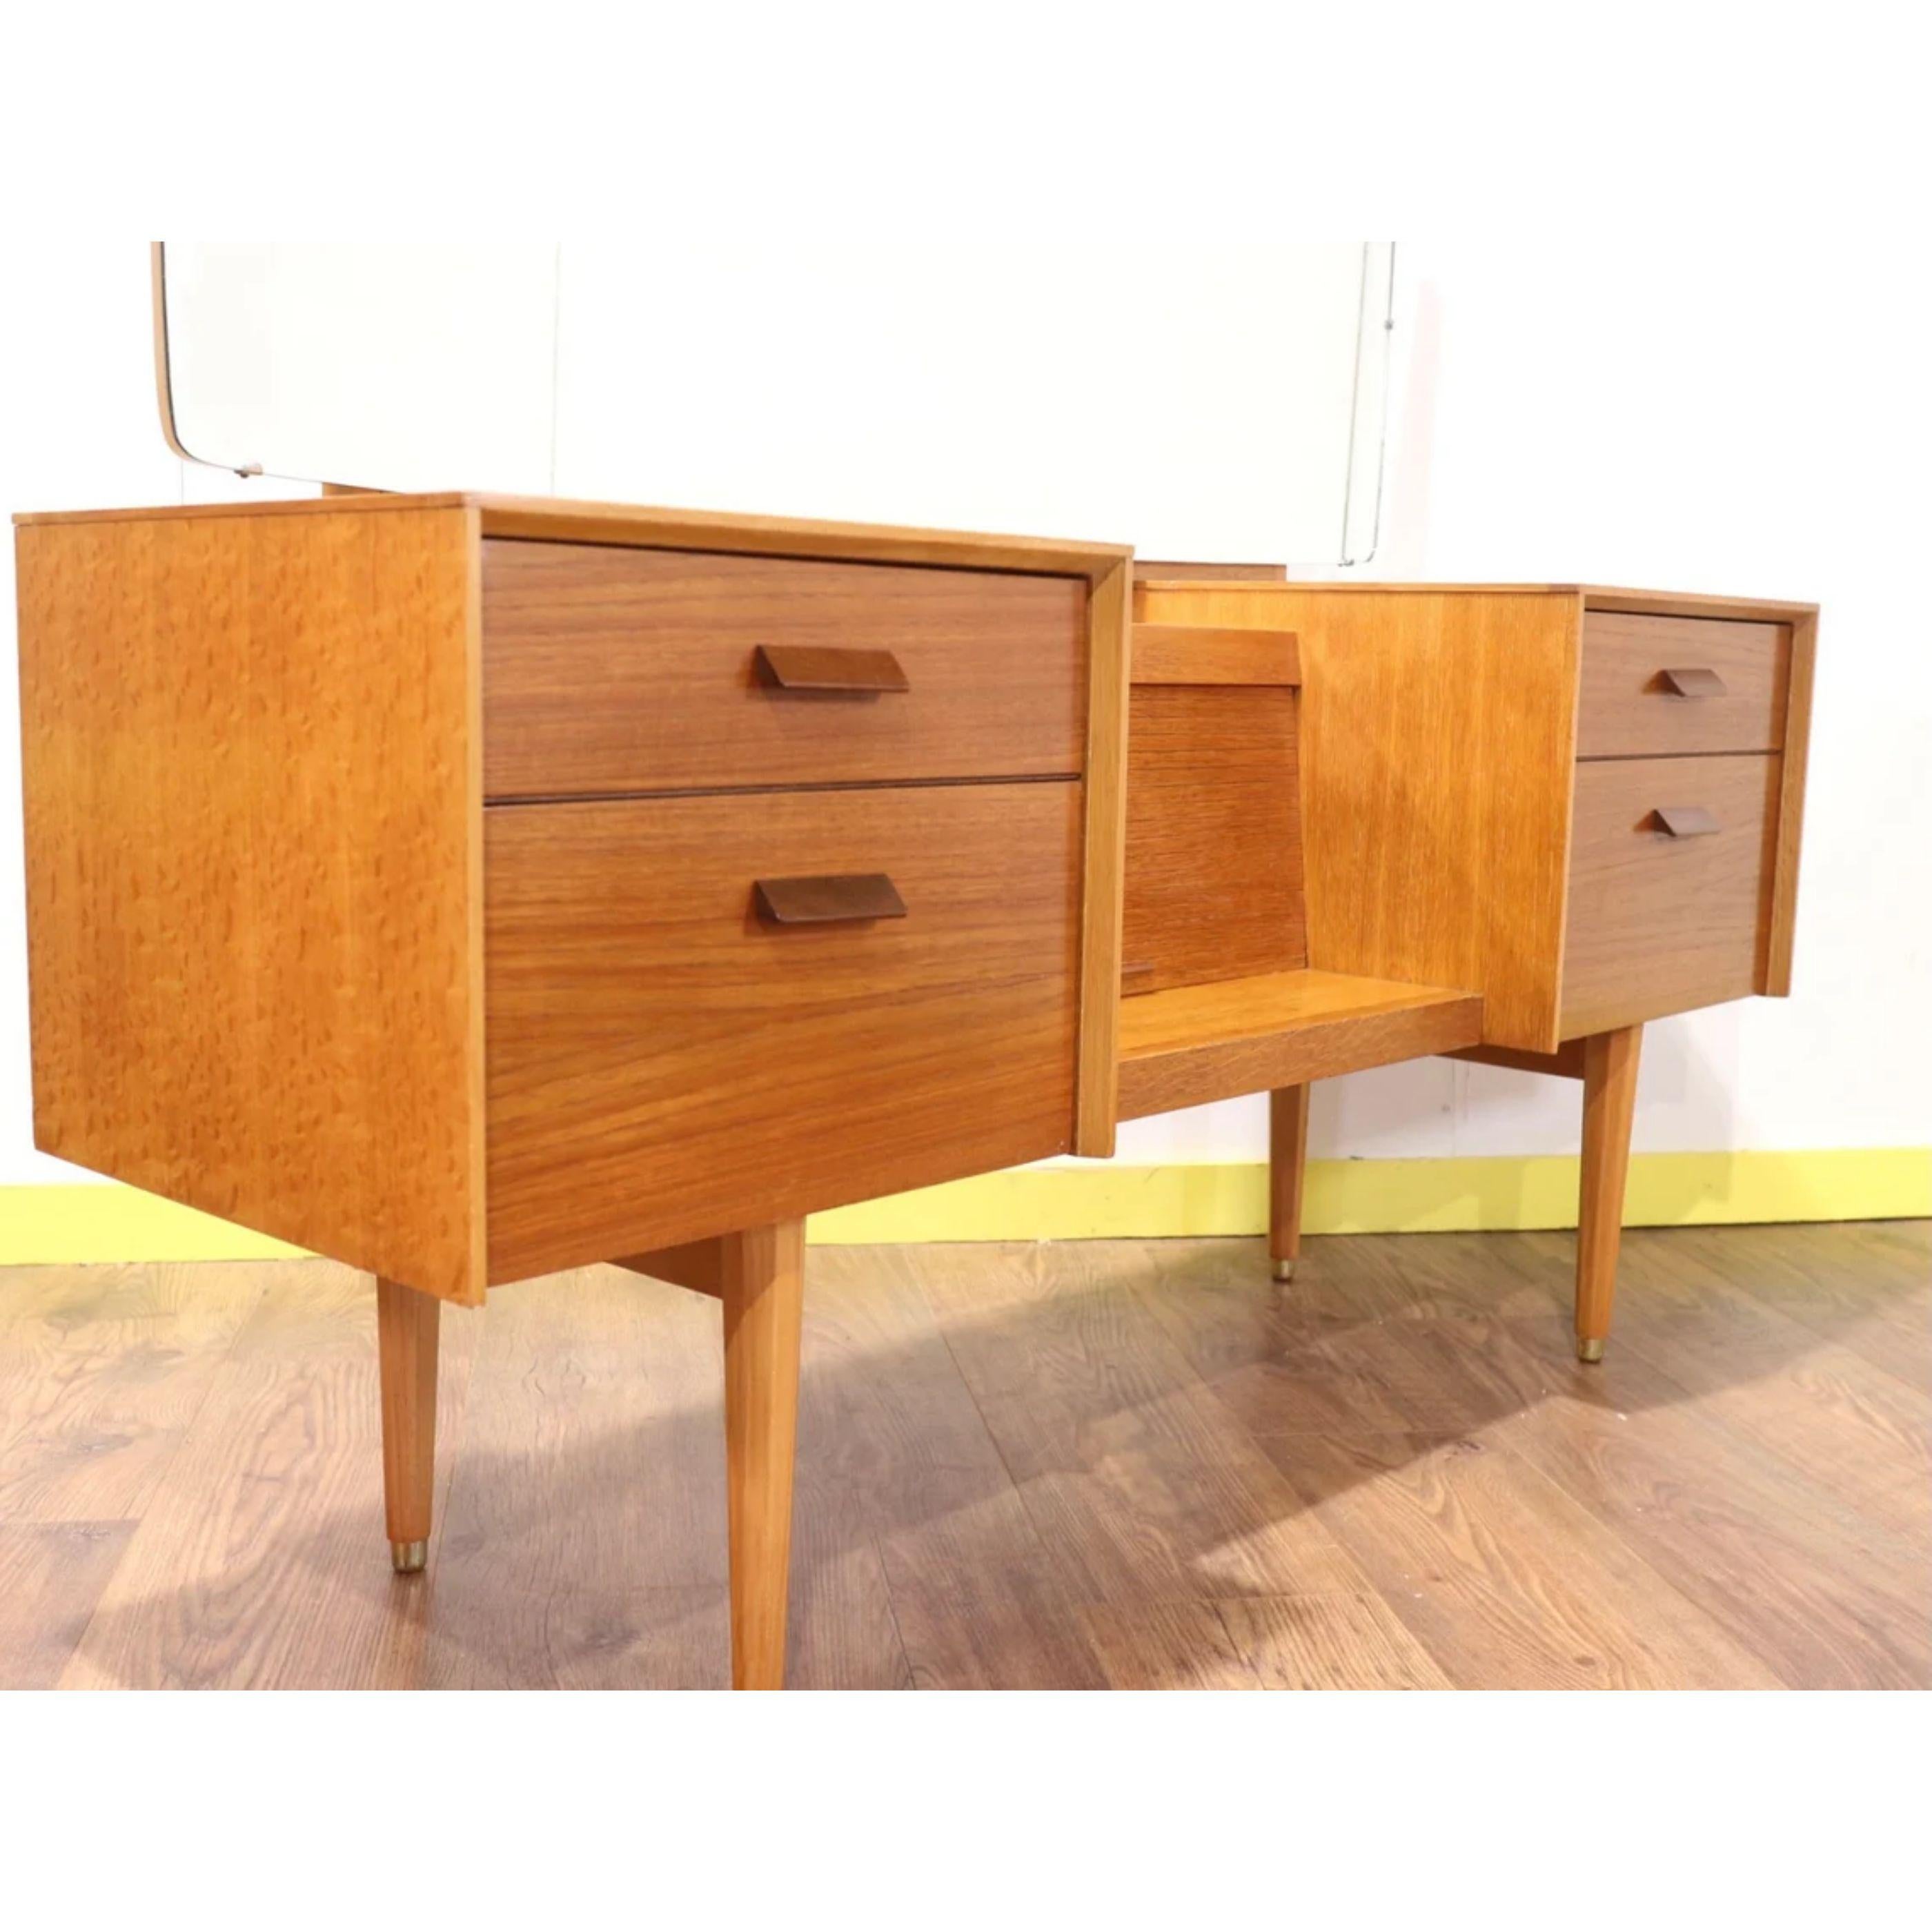 A beautiful and stylish vanity unit by British furniture maker Meredew
A super stylish tambour door storage cabinet sits in the middle and the sculpted handles really set this piece apart.

Dims

w54.5 d16.5 h to top of vanity 24.5 / to top of